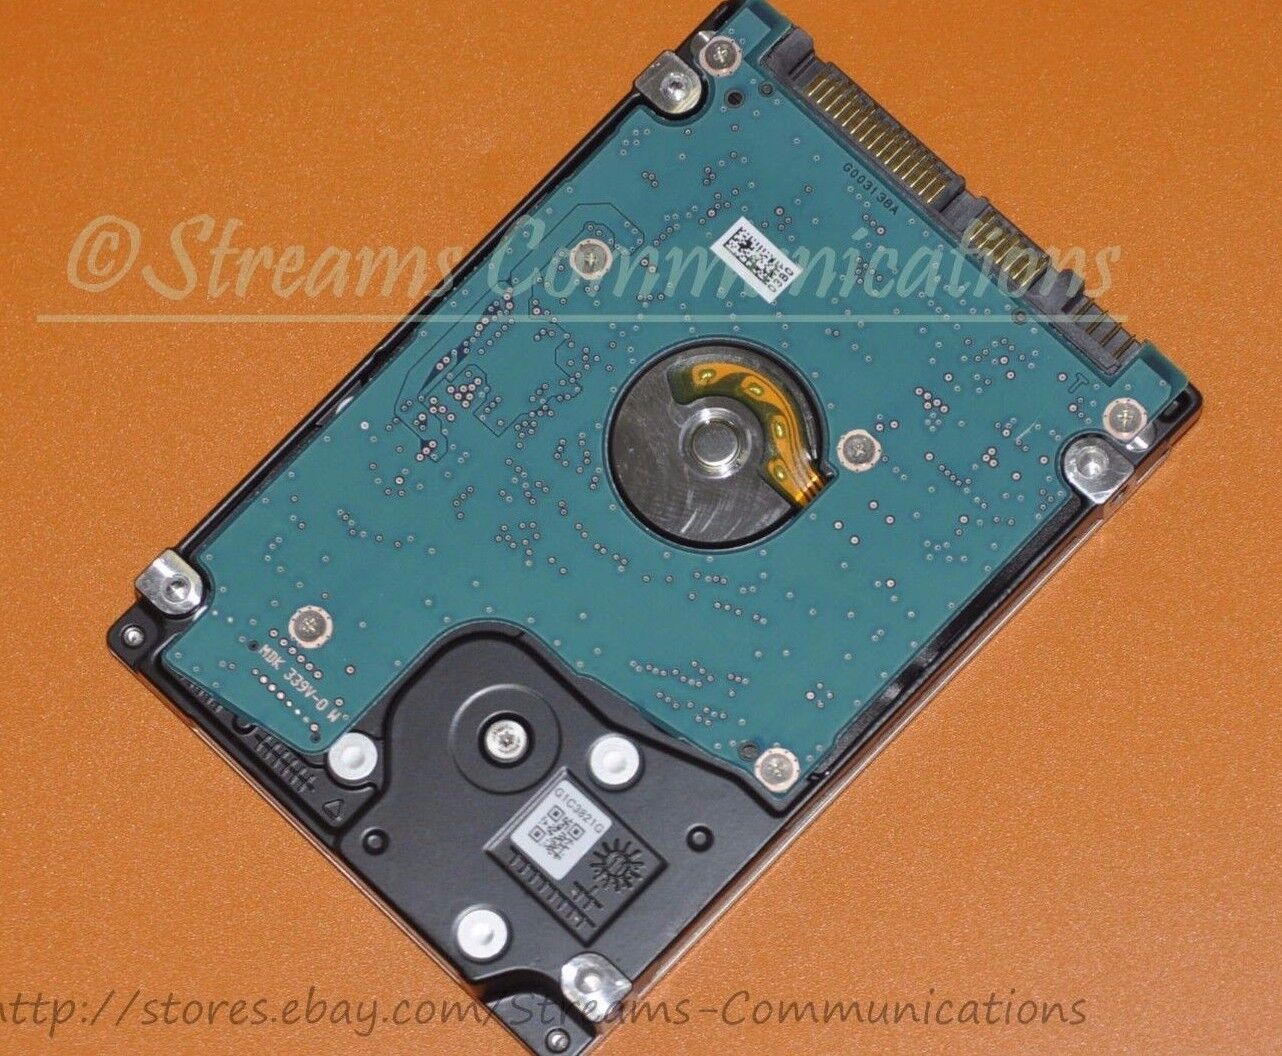 500GB Laptop HDD Hard Disk Drive for HP 15-G019WM, HP 15-G013CL Notebook PCs